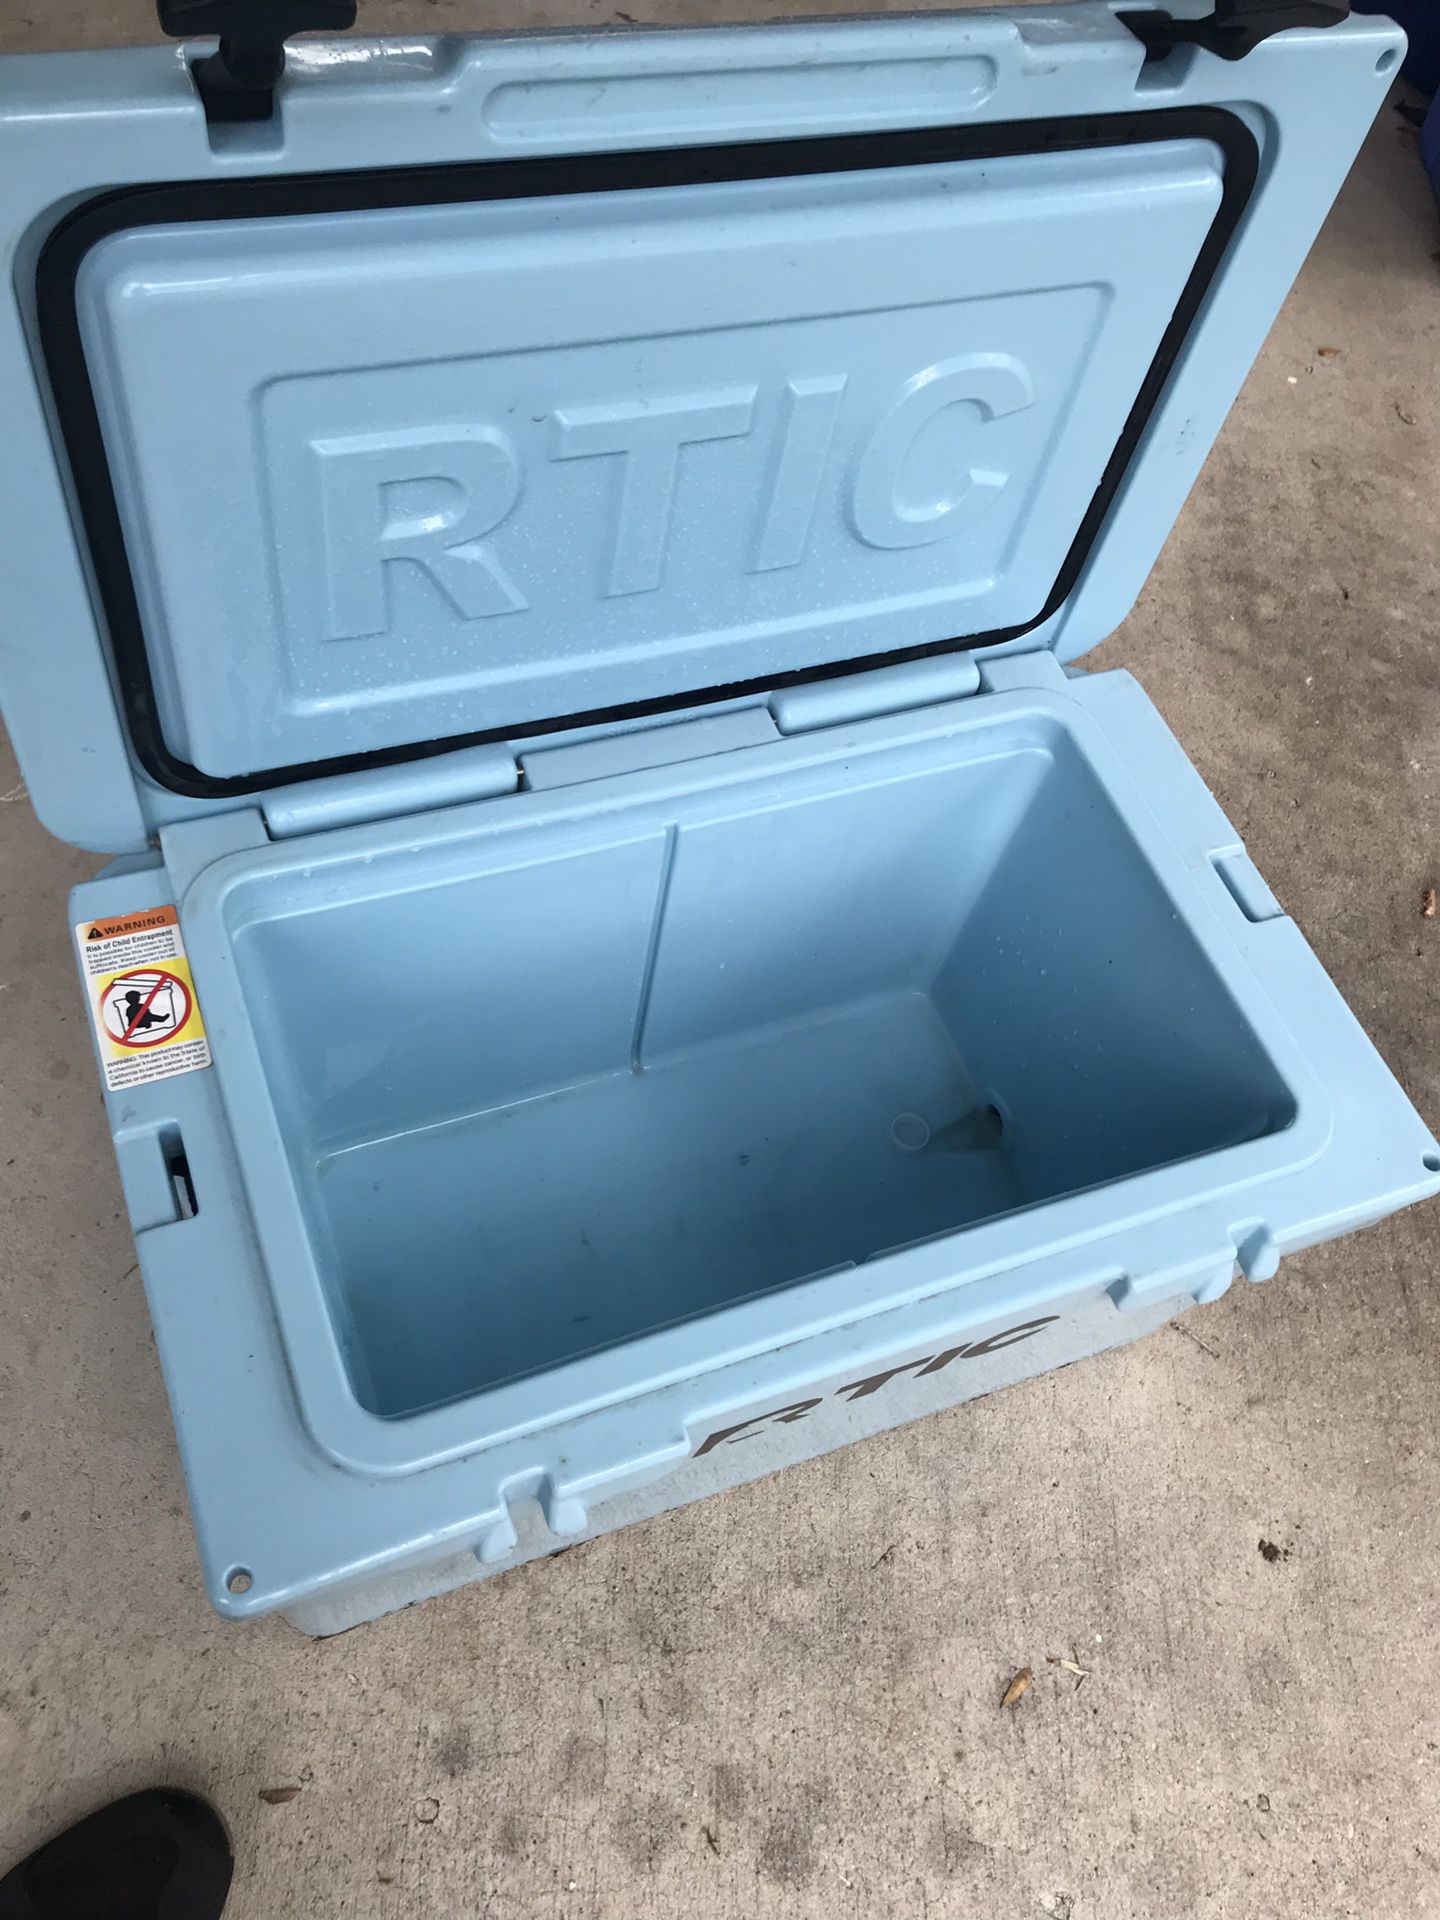 Rtic 45 Tan Cooler for Sale in Garland, TX - OfferUp